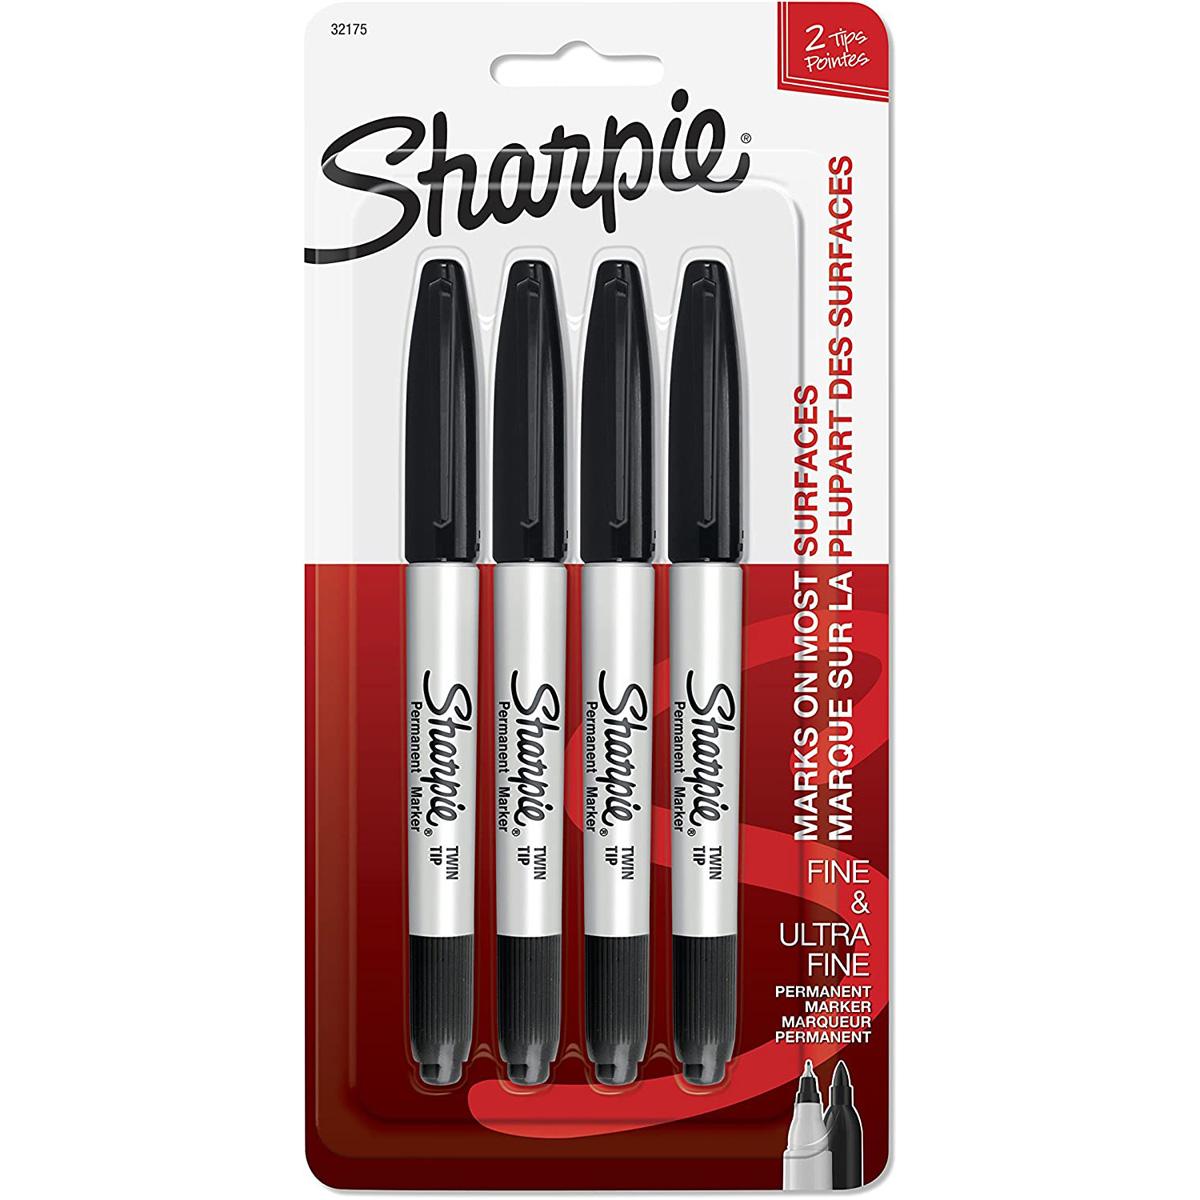 4 Sharpie Twin Tip Permanent Markers for $4.89